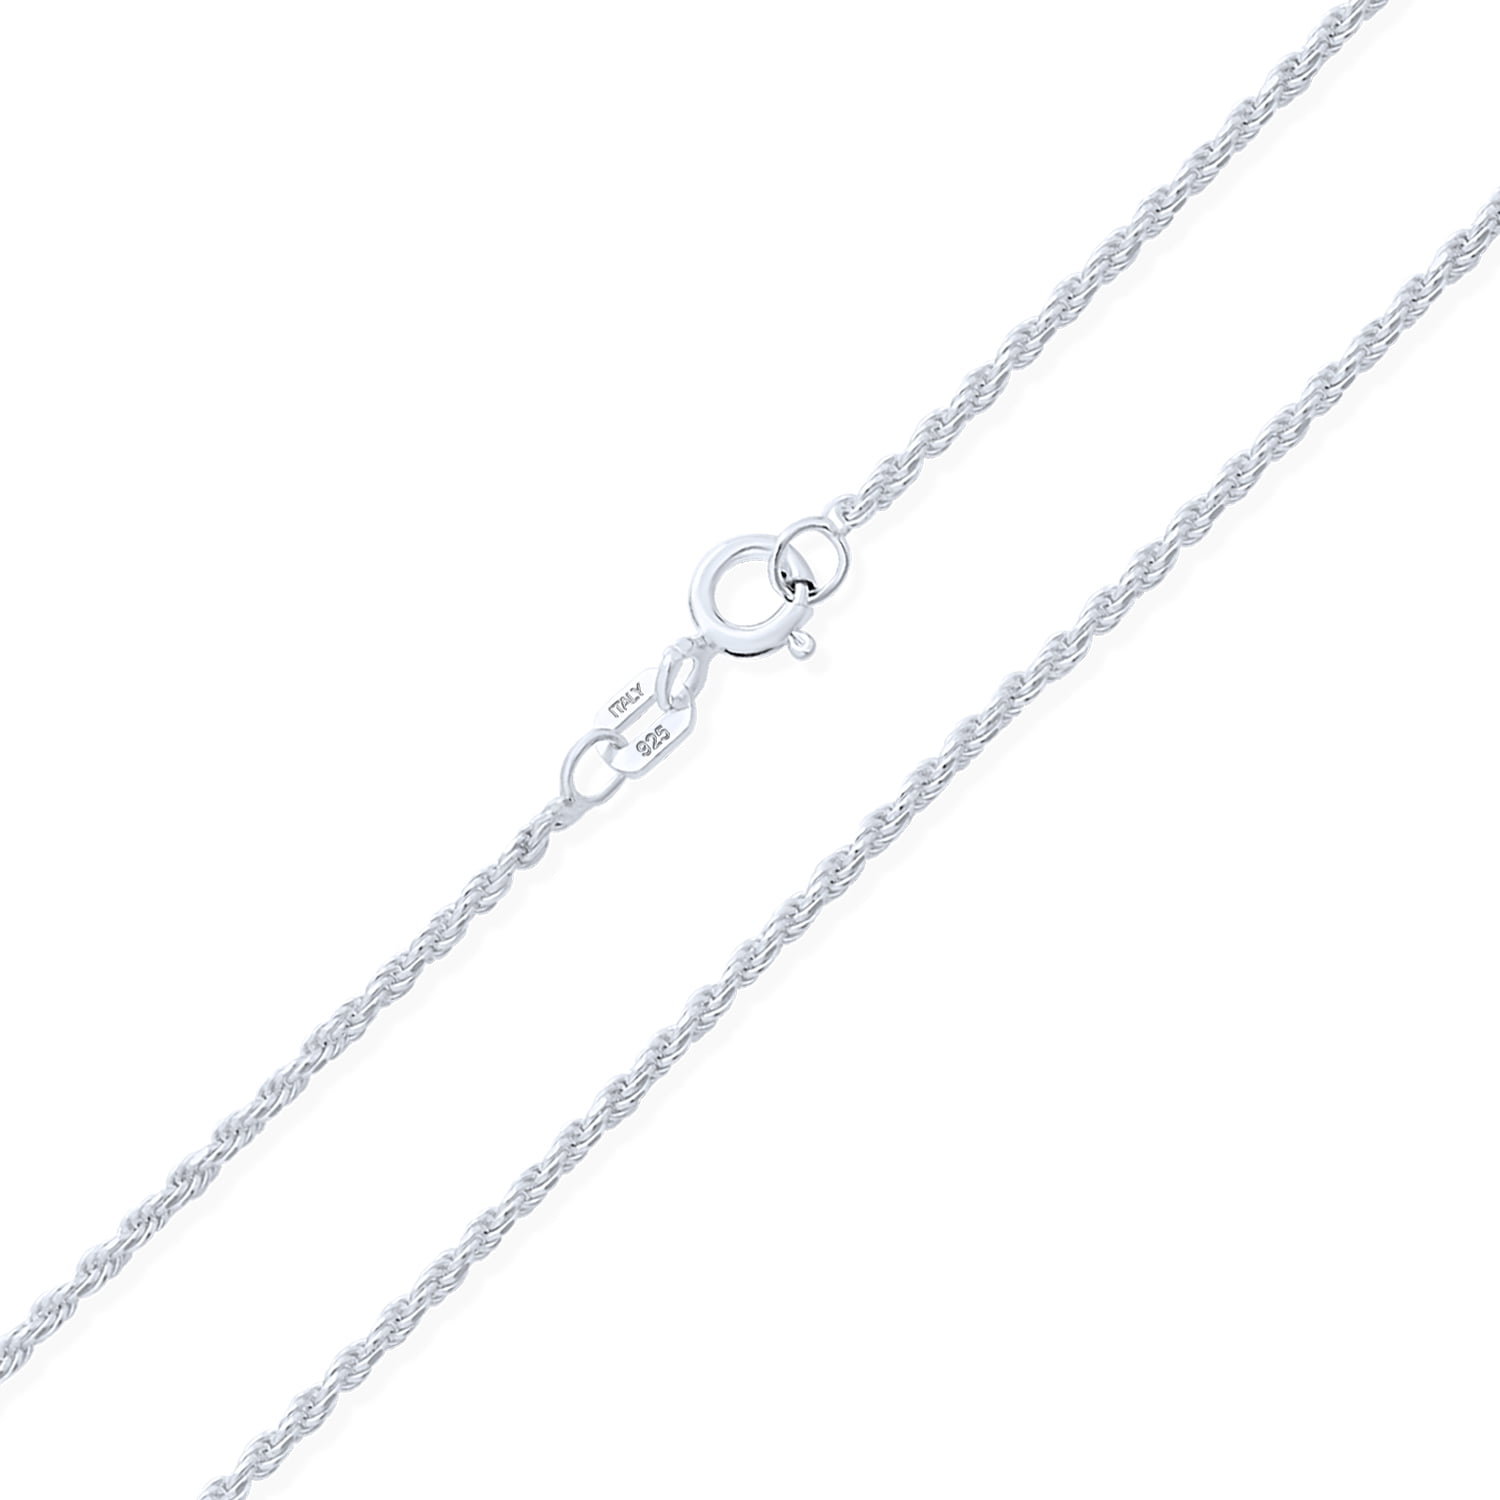 Classic Authentic 18k White Gold Bling 1mm Wheat Link Chain Necklace 18 inch 